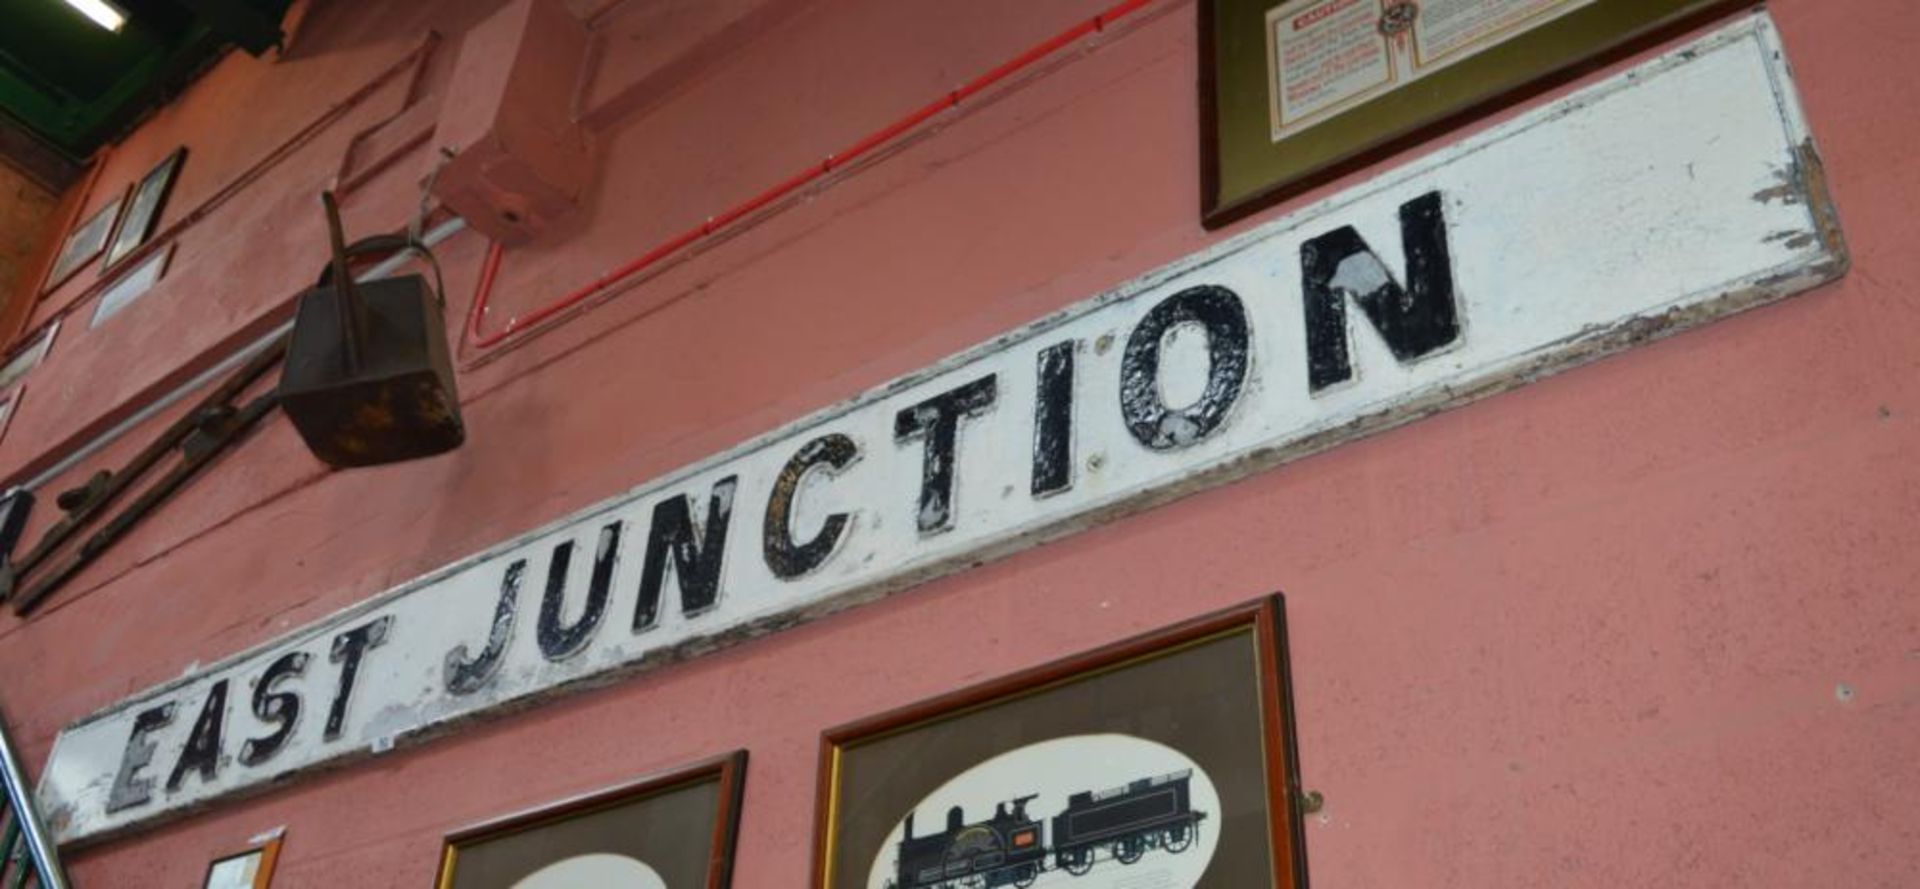 1 x East Junction Vintage Railway Signage - Wooden Back With Metal Lettering Finished in Black and W